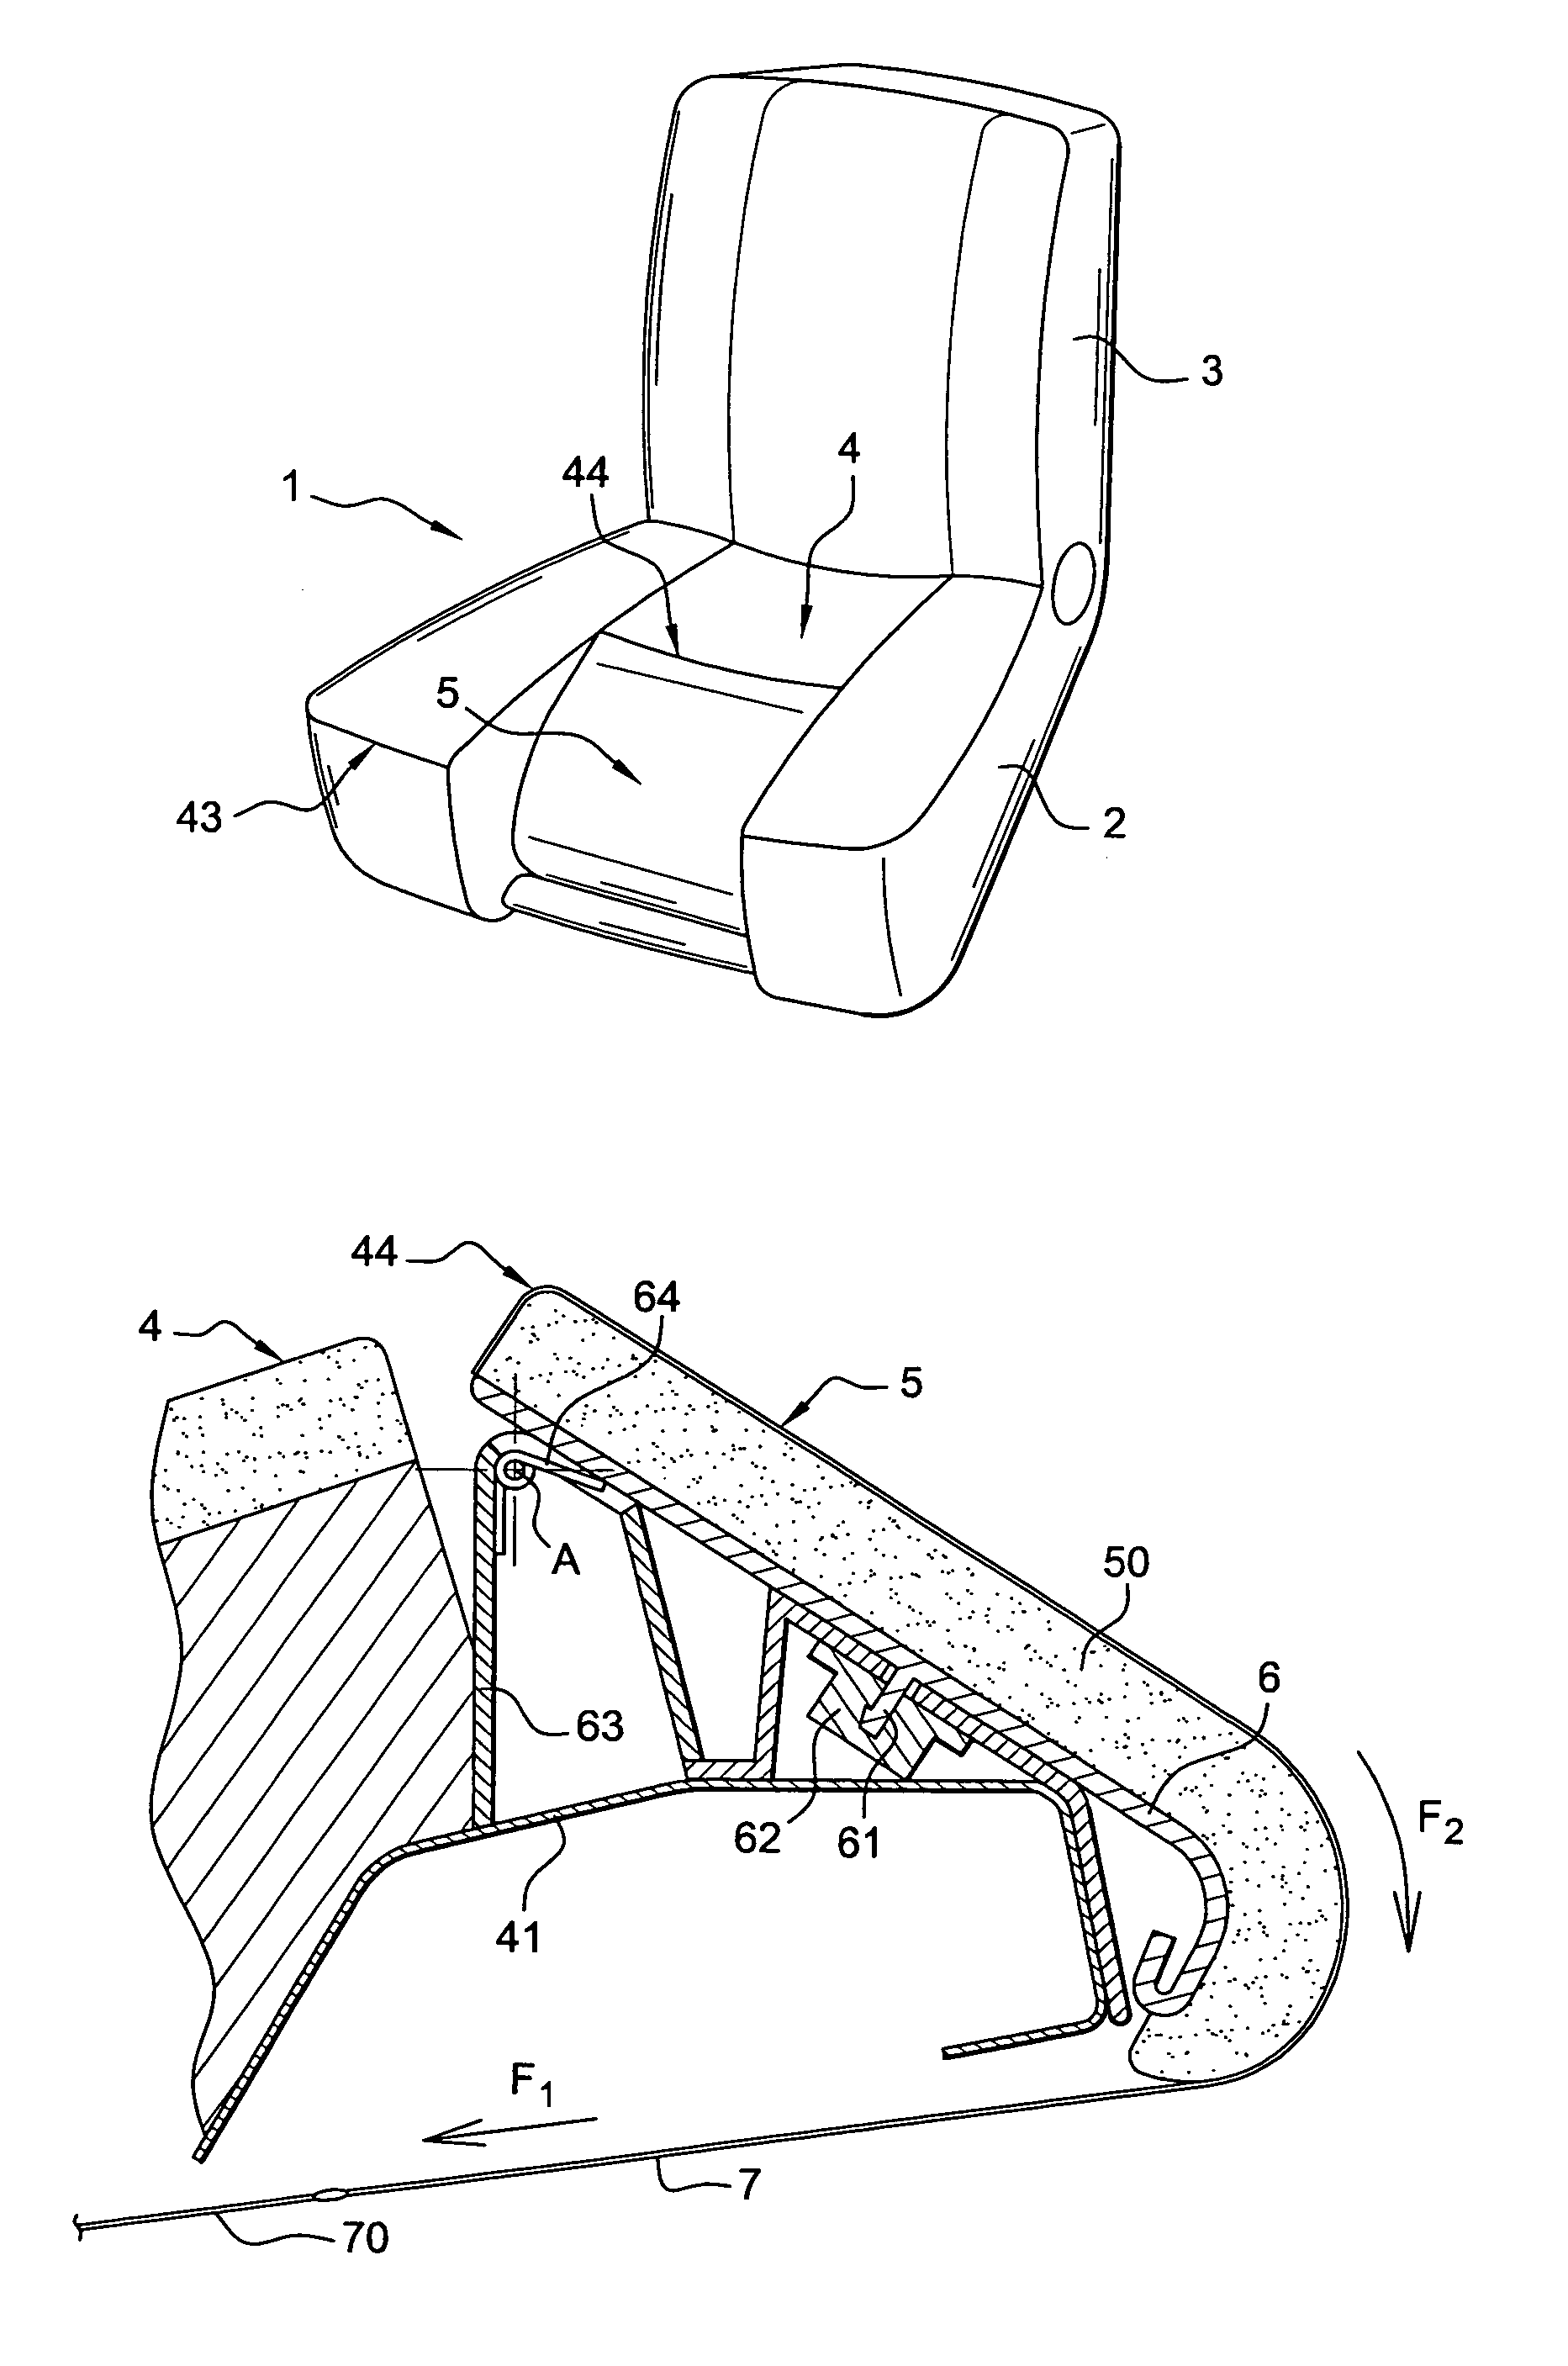 Automobile vehicle seat adaptable to accommodate a child